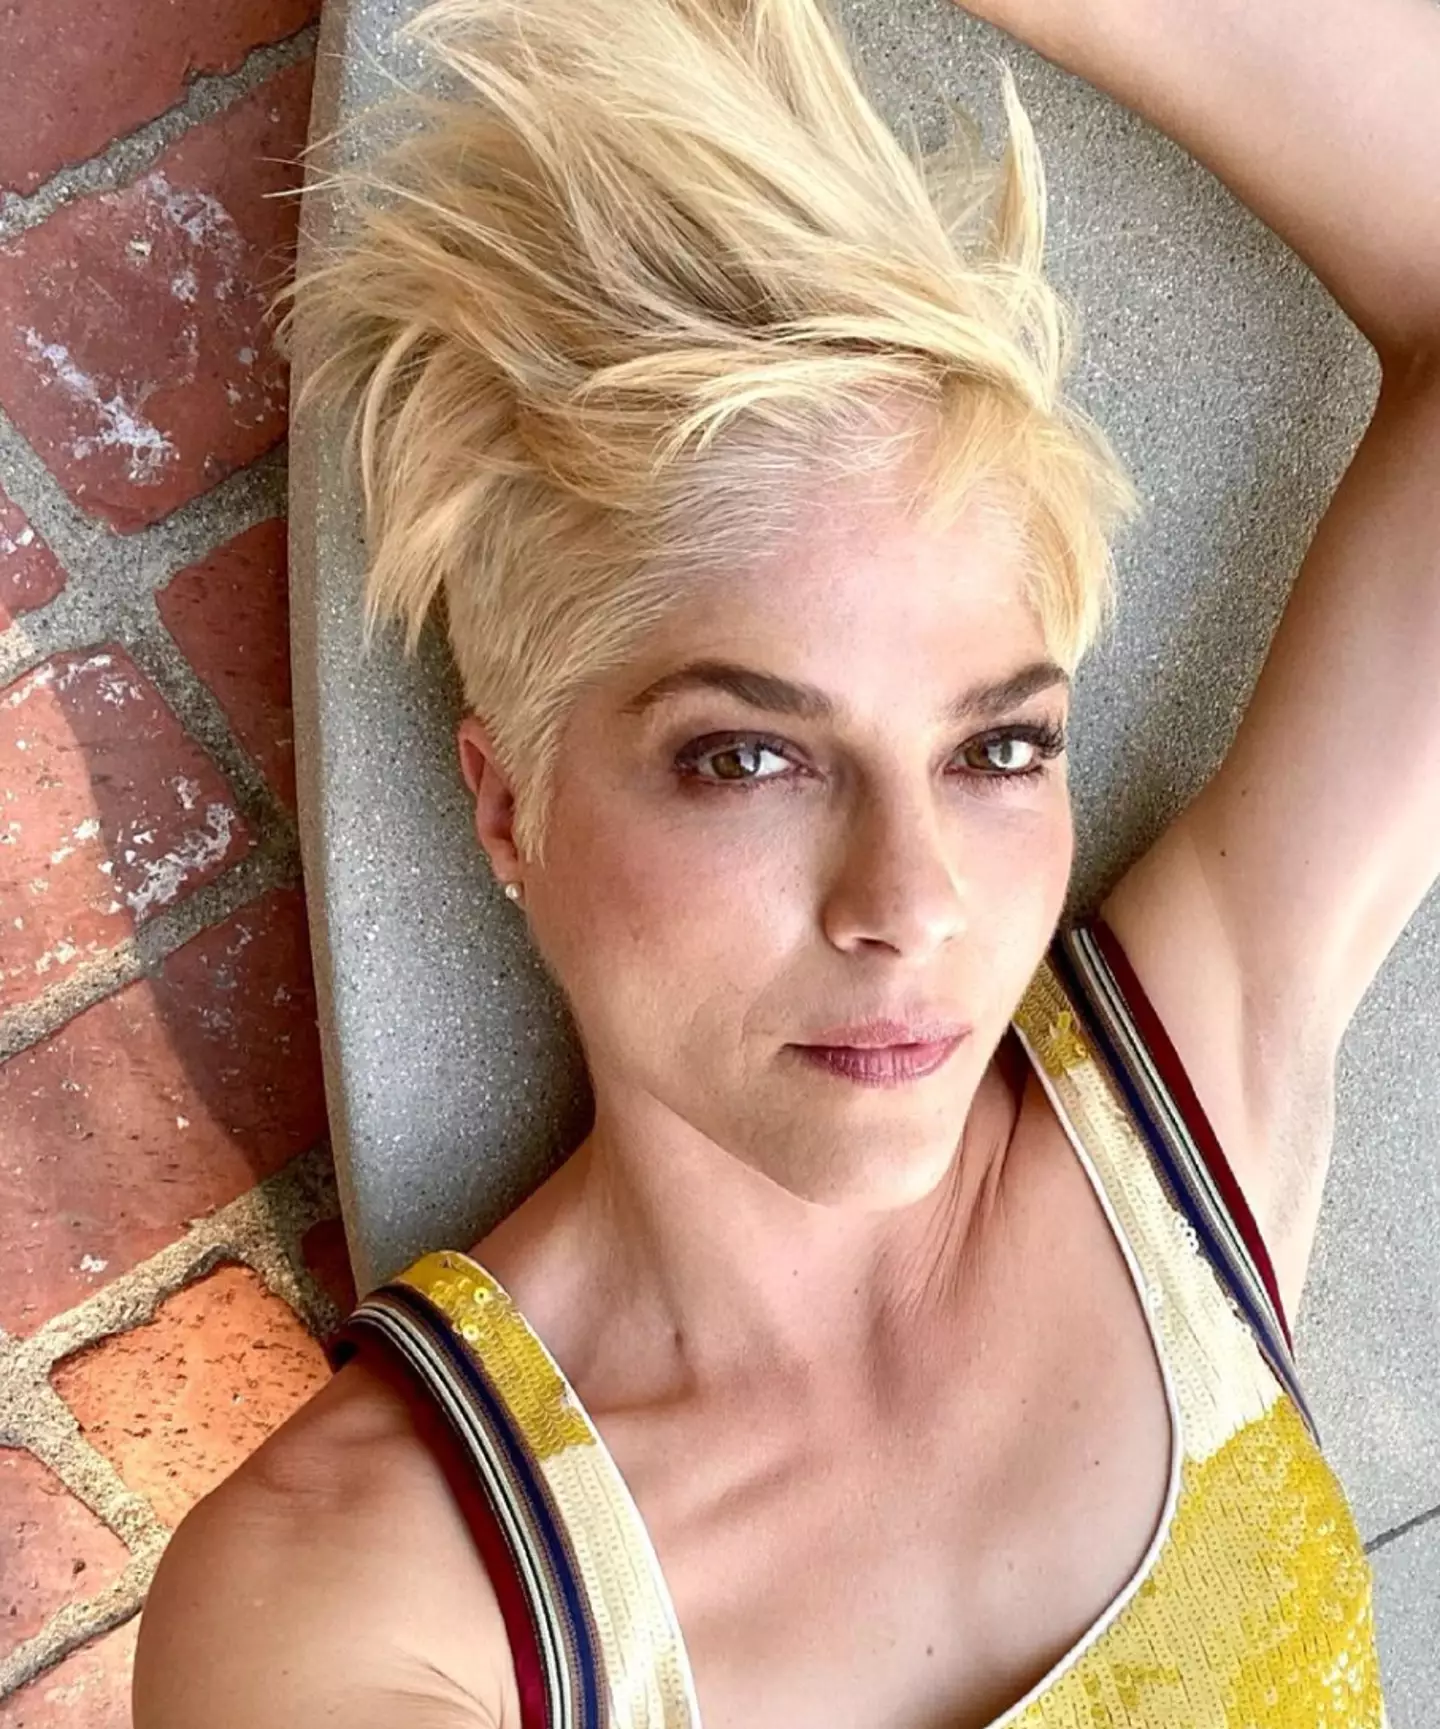 Actress Selma Blair has been honest about how her symptoms affect her daily life.